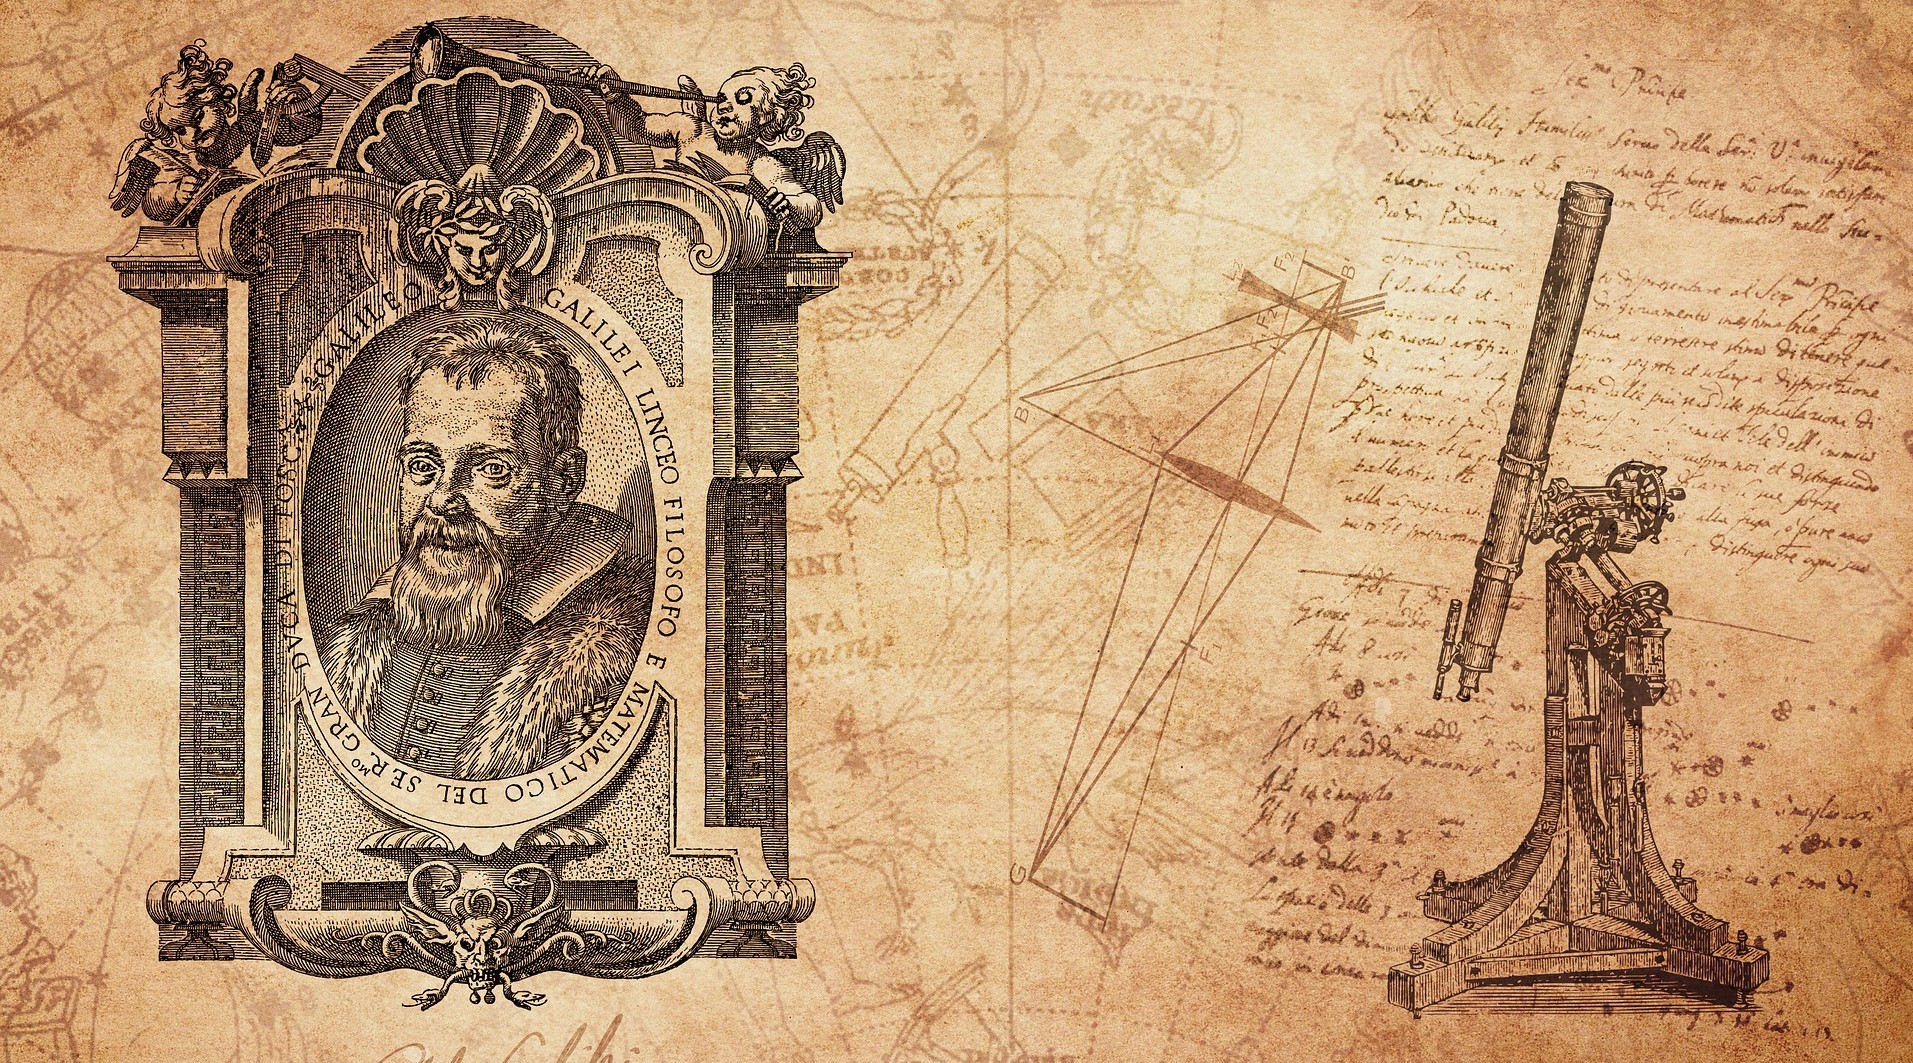 On Galileo Day, we discuss the greatest discoveries of Galileo Galilei. Credit: Pixabay